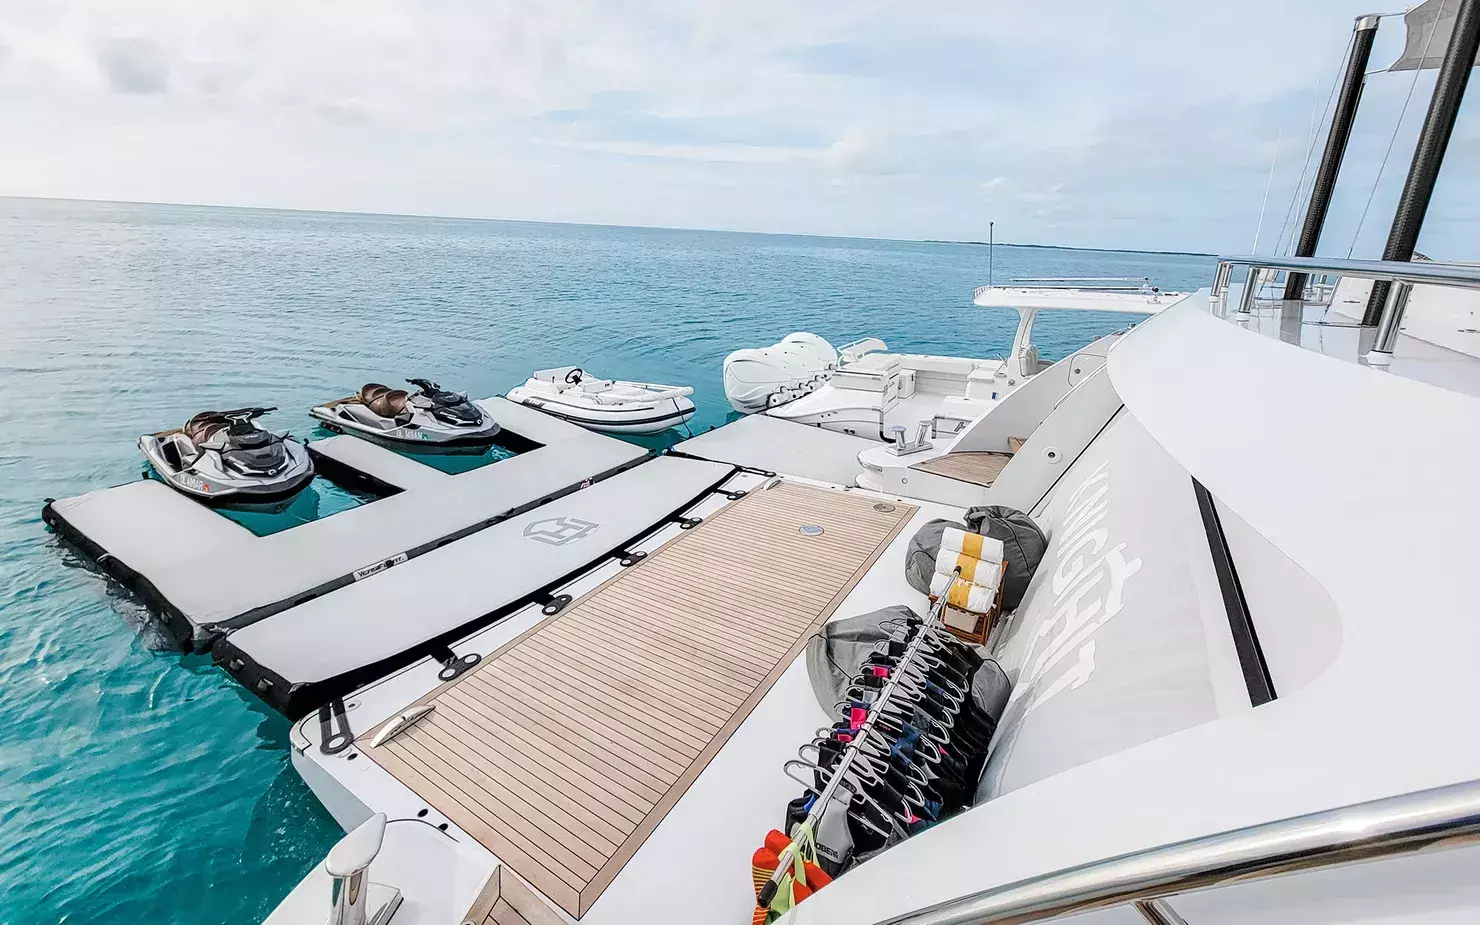 Knight by Heesen - Top rates for a Rental of a private Superyacht in New Caledonia